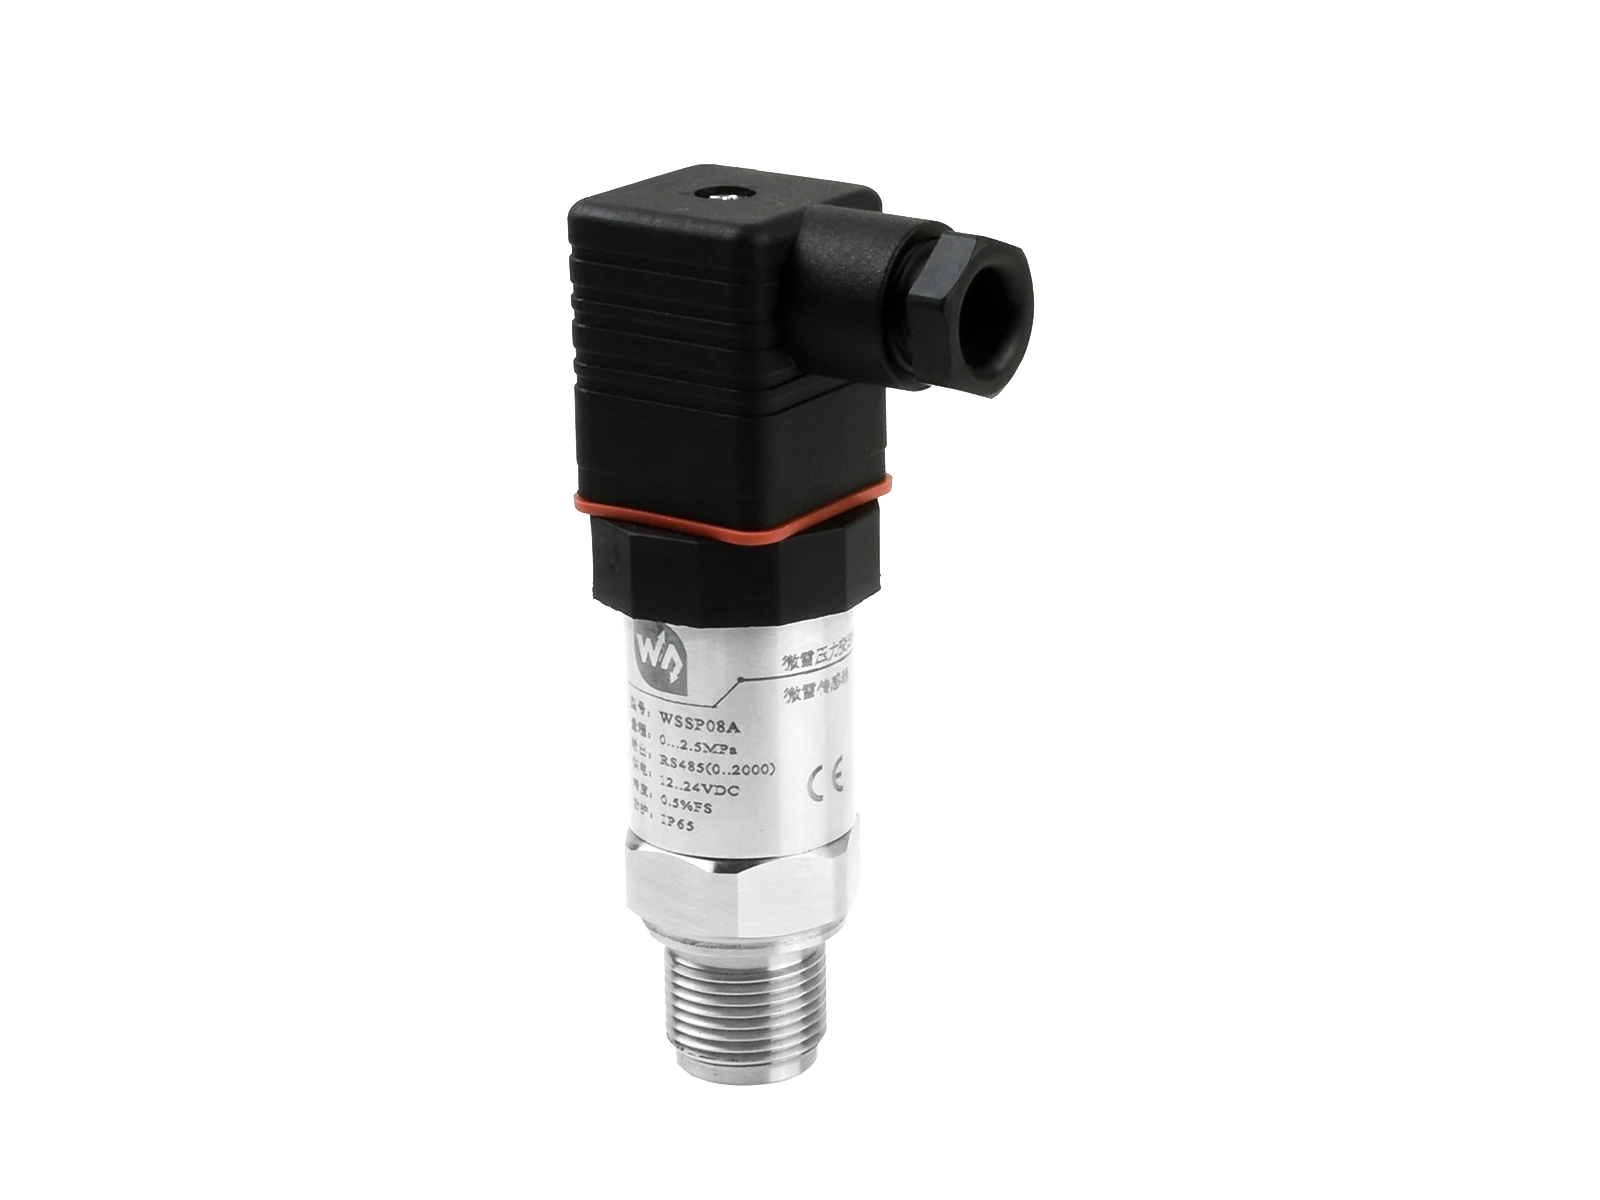 Waveshare Industrial 2.5MPa Pressure Transmitter Grade-A Diffused Silicon Transducer RS485 Bus Hydraulic Barometric Oil Sensor